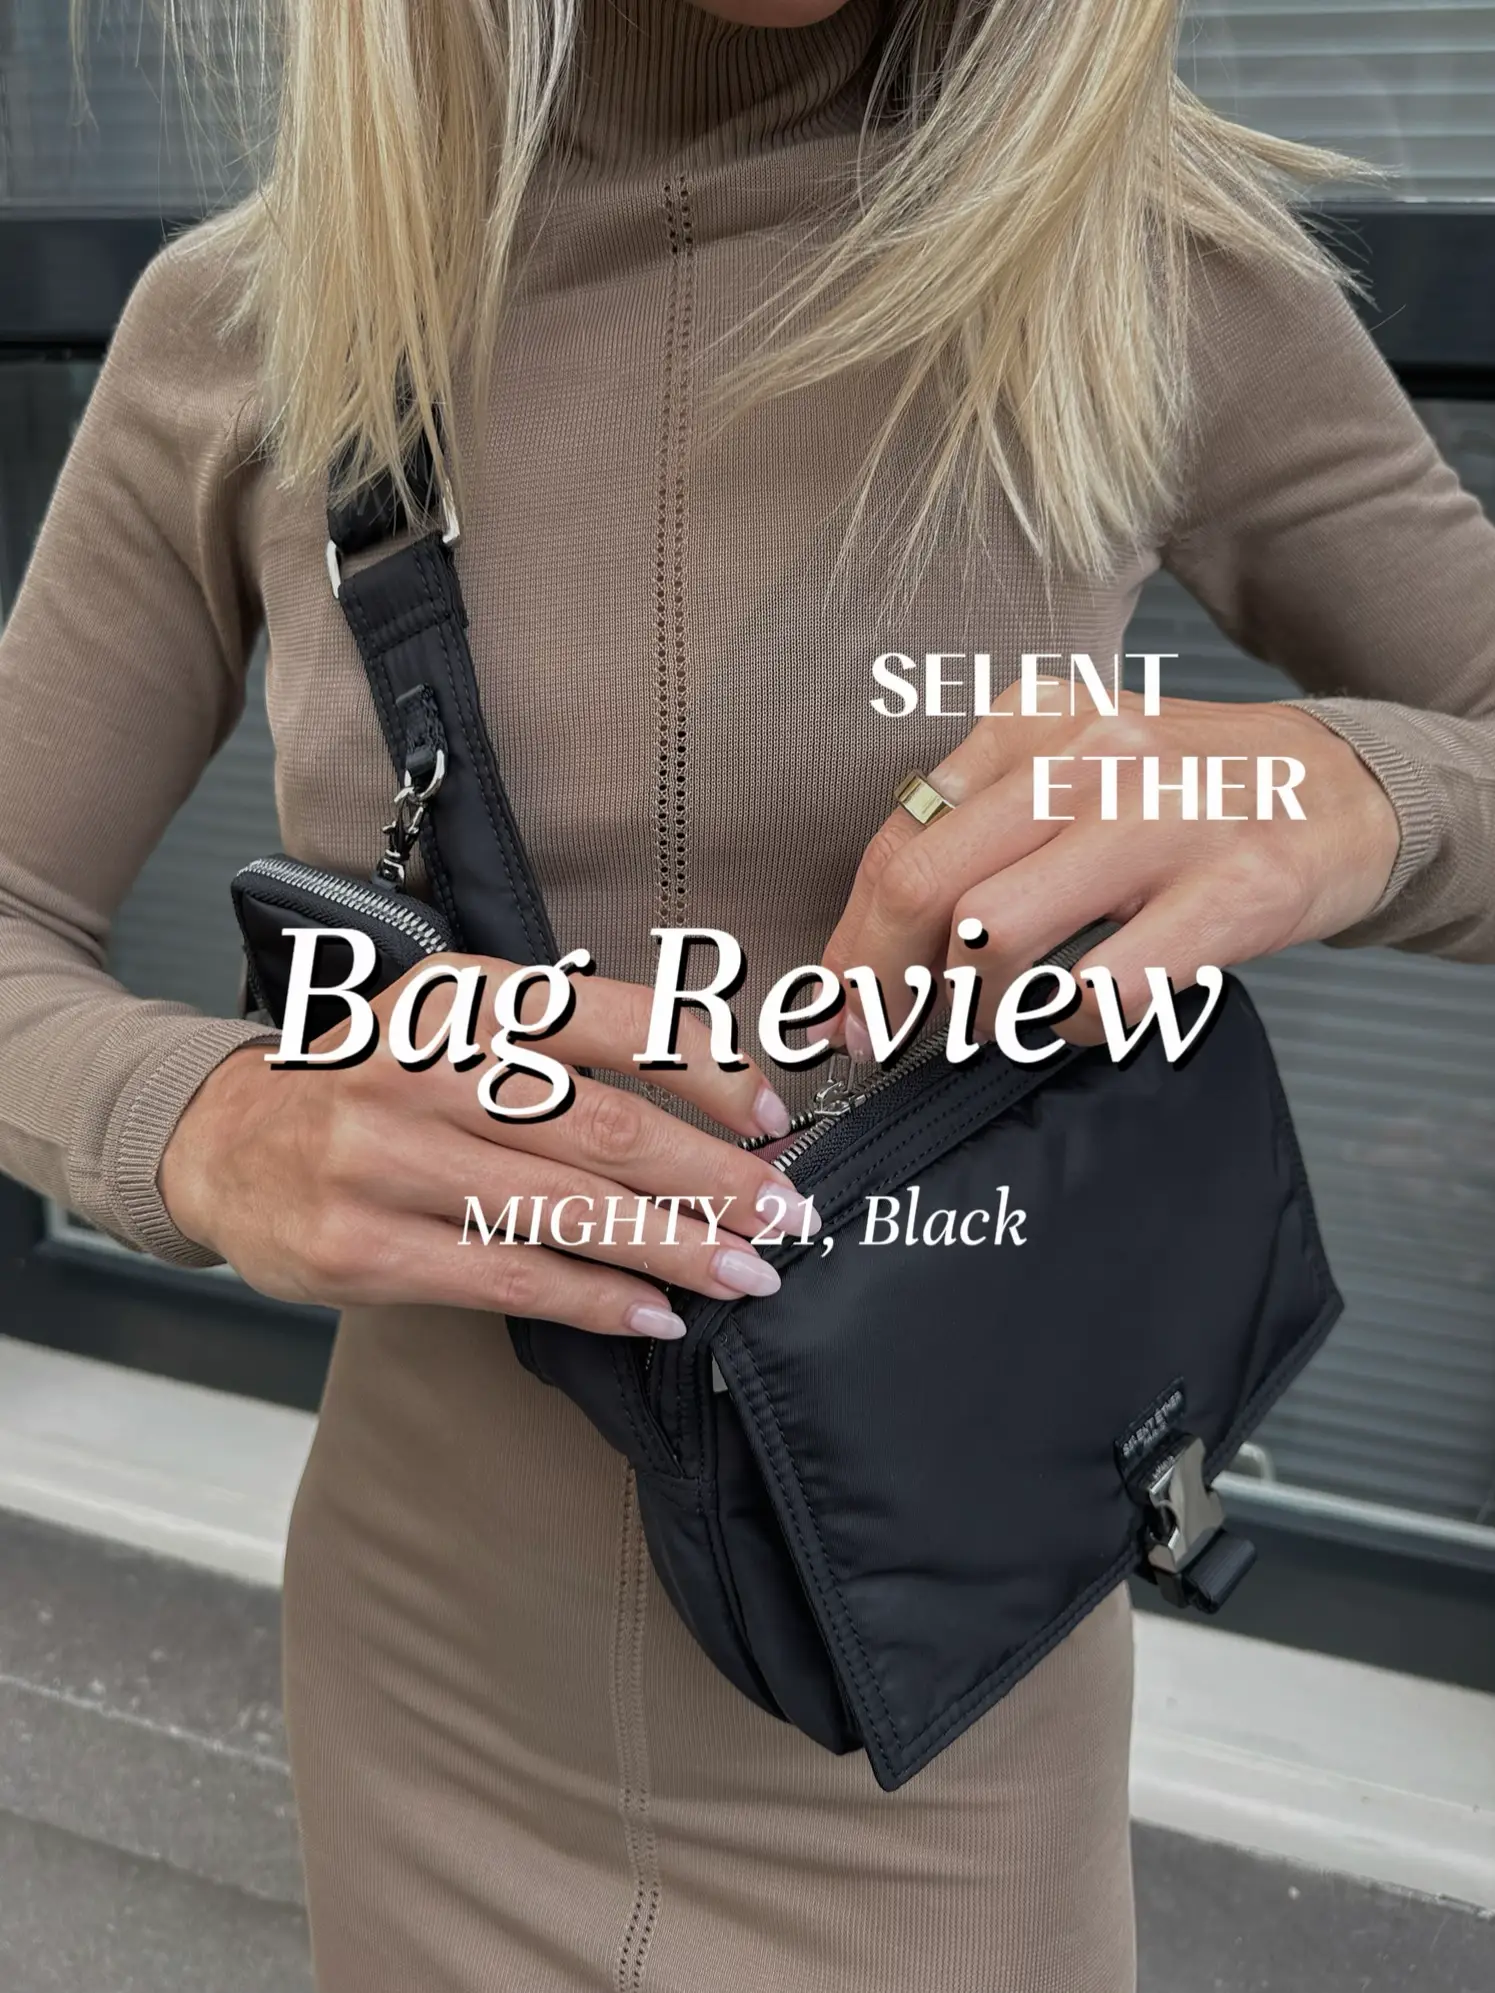 SELENT ETHER Bag Review - Mighty 21, Black | Gallery posted